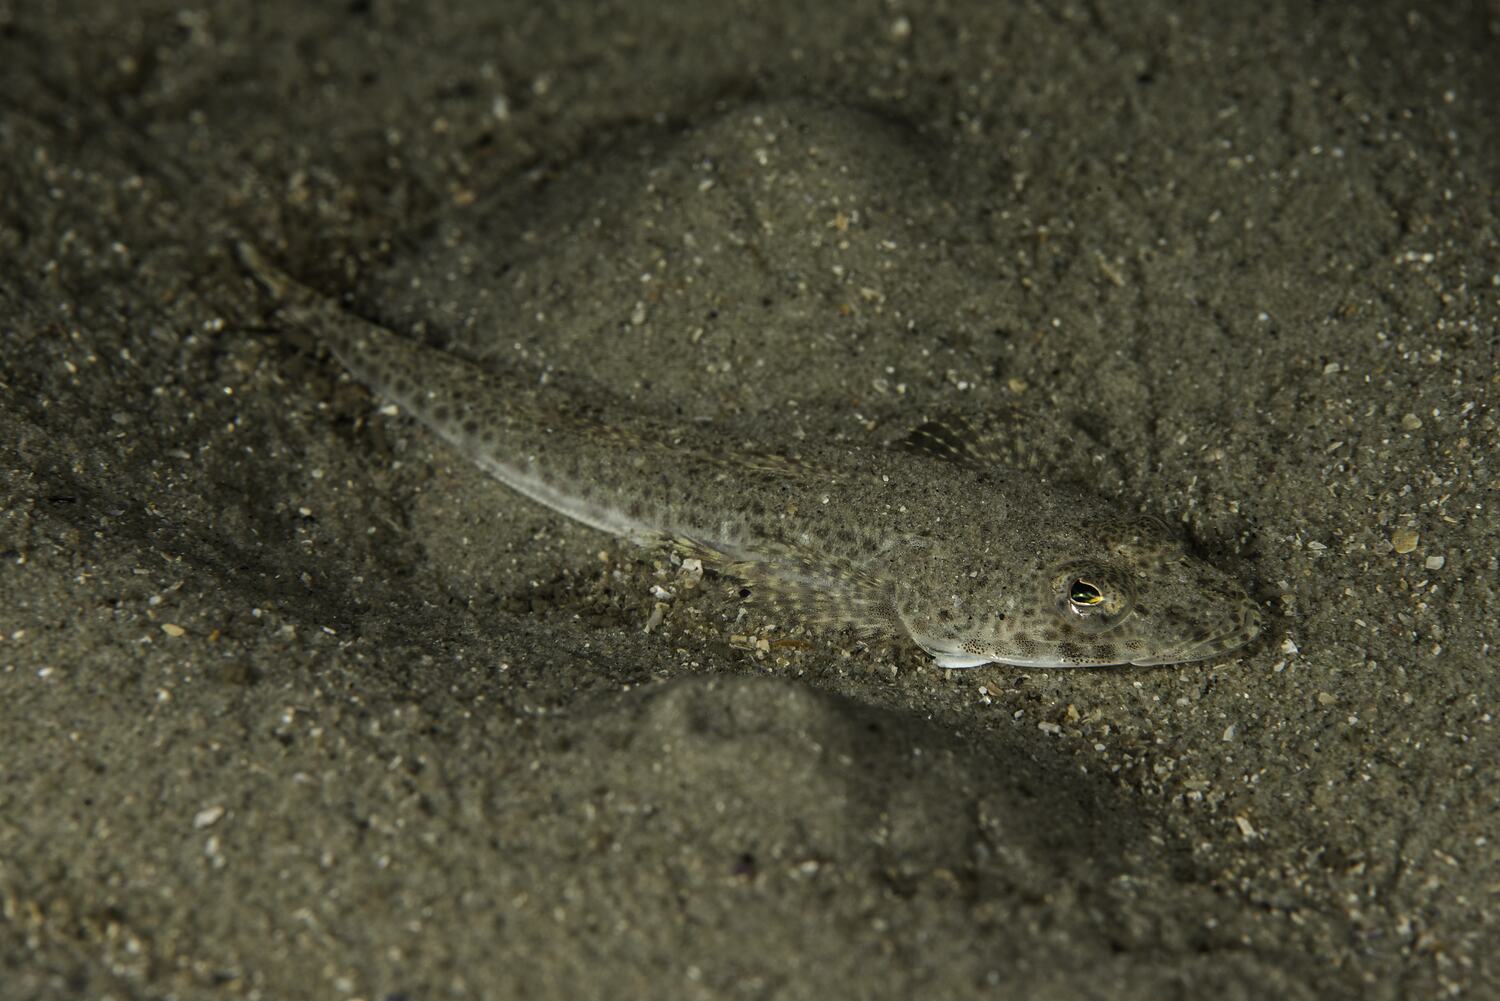 A sand coloured fish, with eyes facing upwards, sits amongst gritty sand on the bottom of the seafloor. 